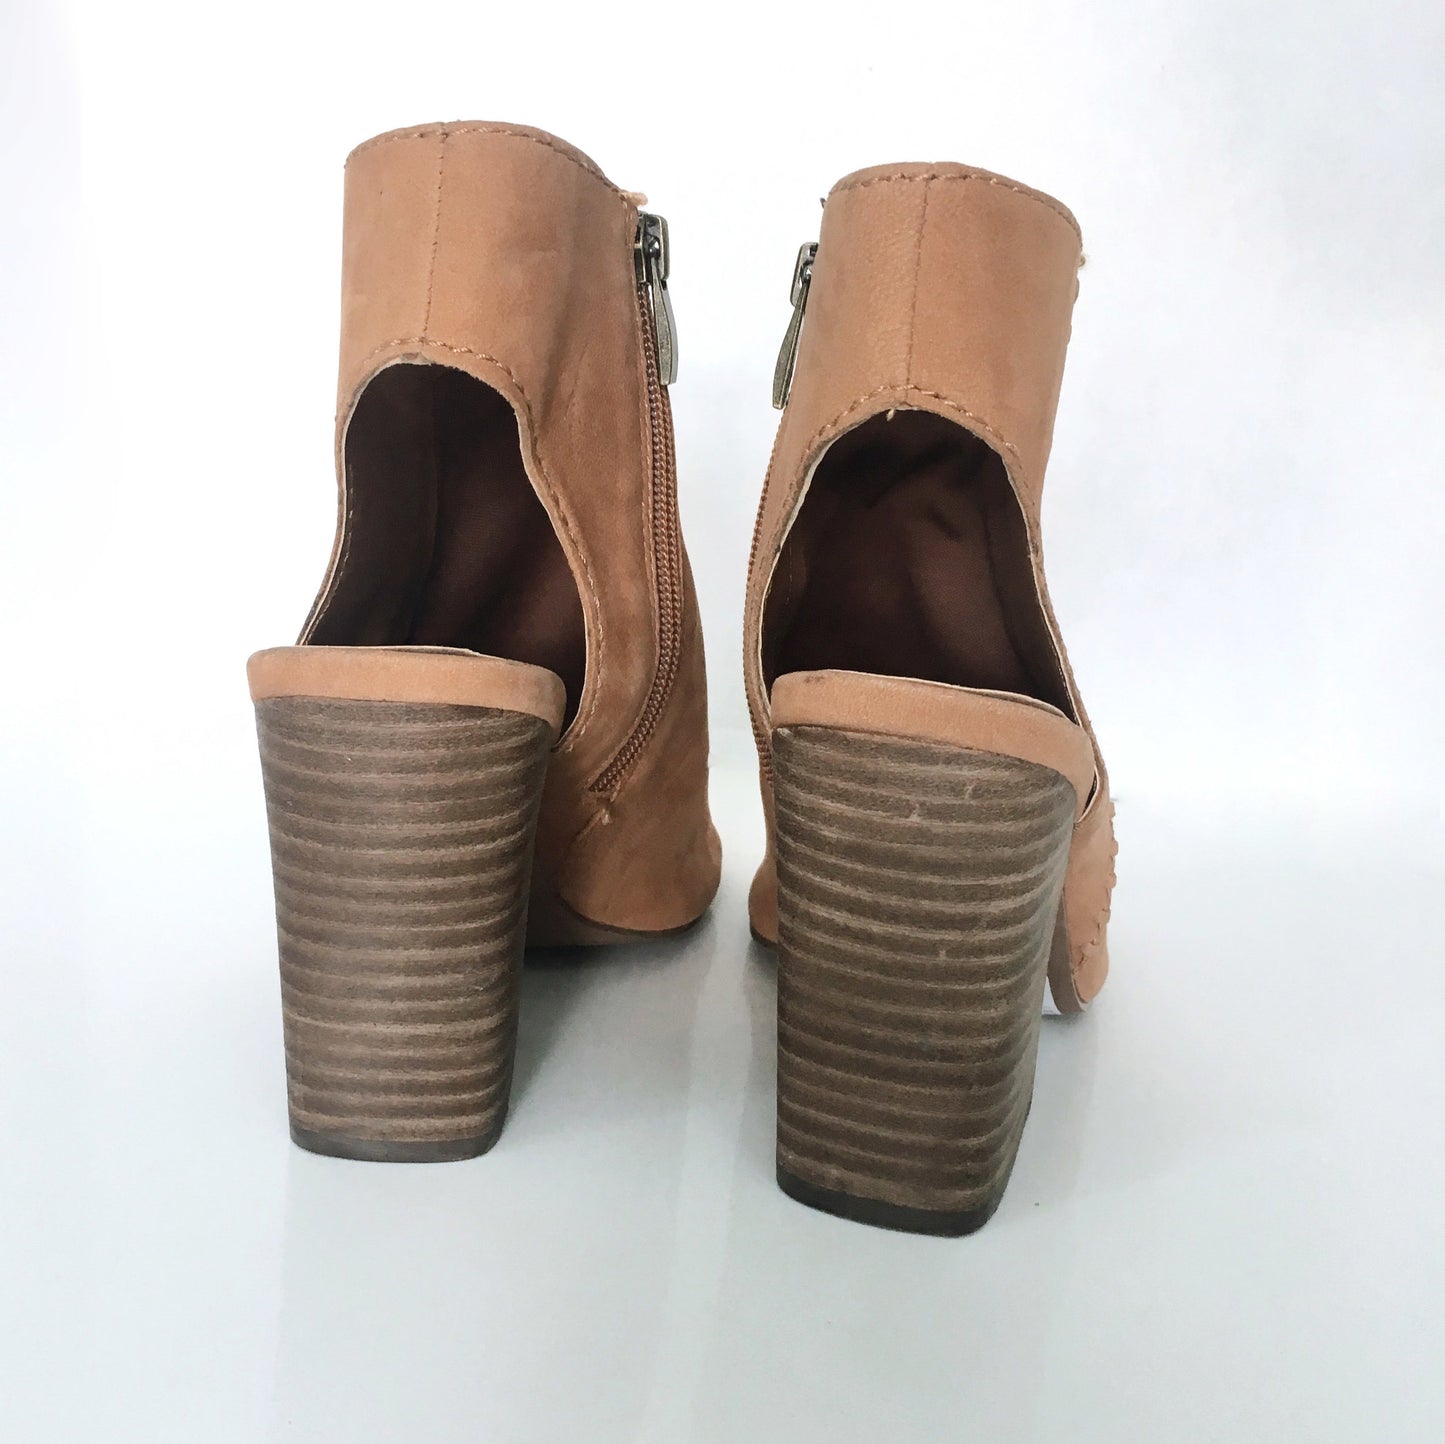 Steve Madden Booties with Leather Braid - size 8.5